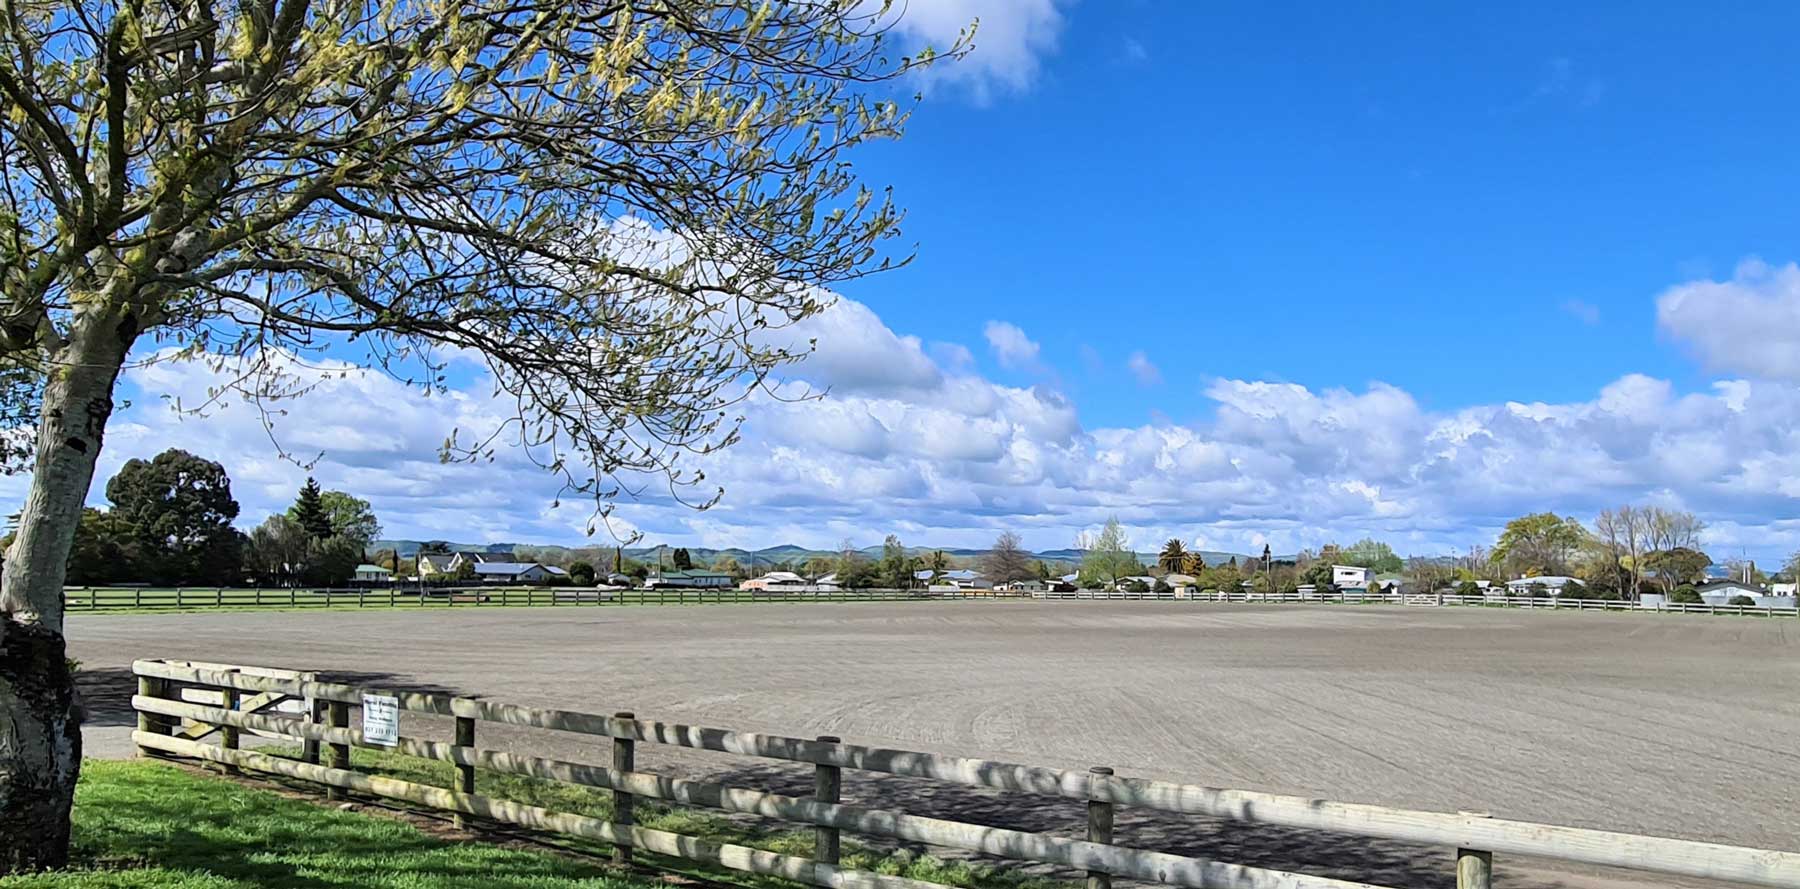 Image of the Sand Arena at Solway Showgrounds in Masterton